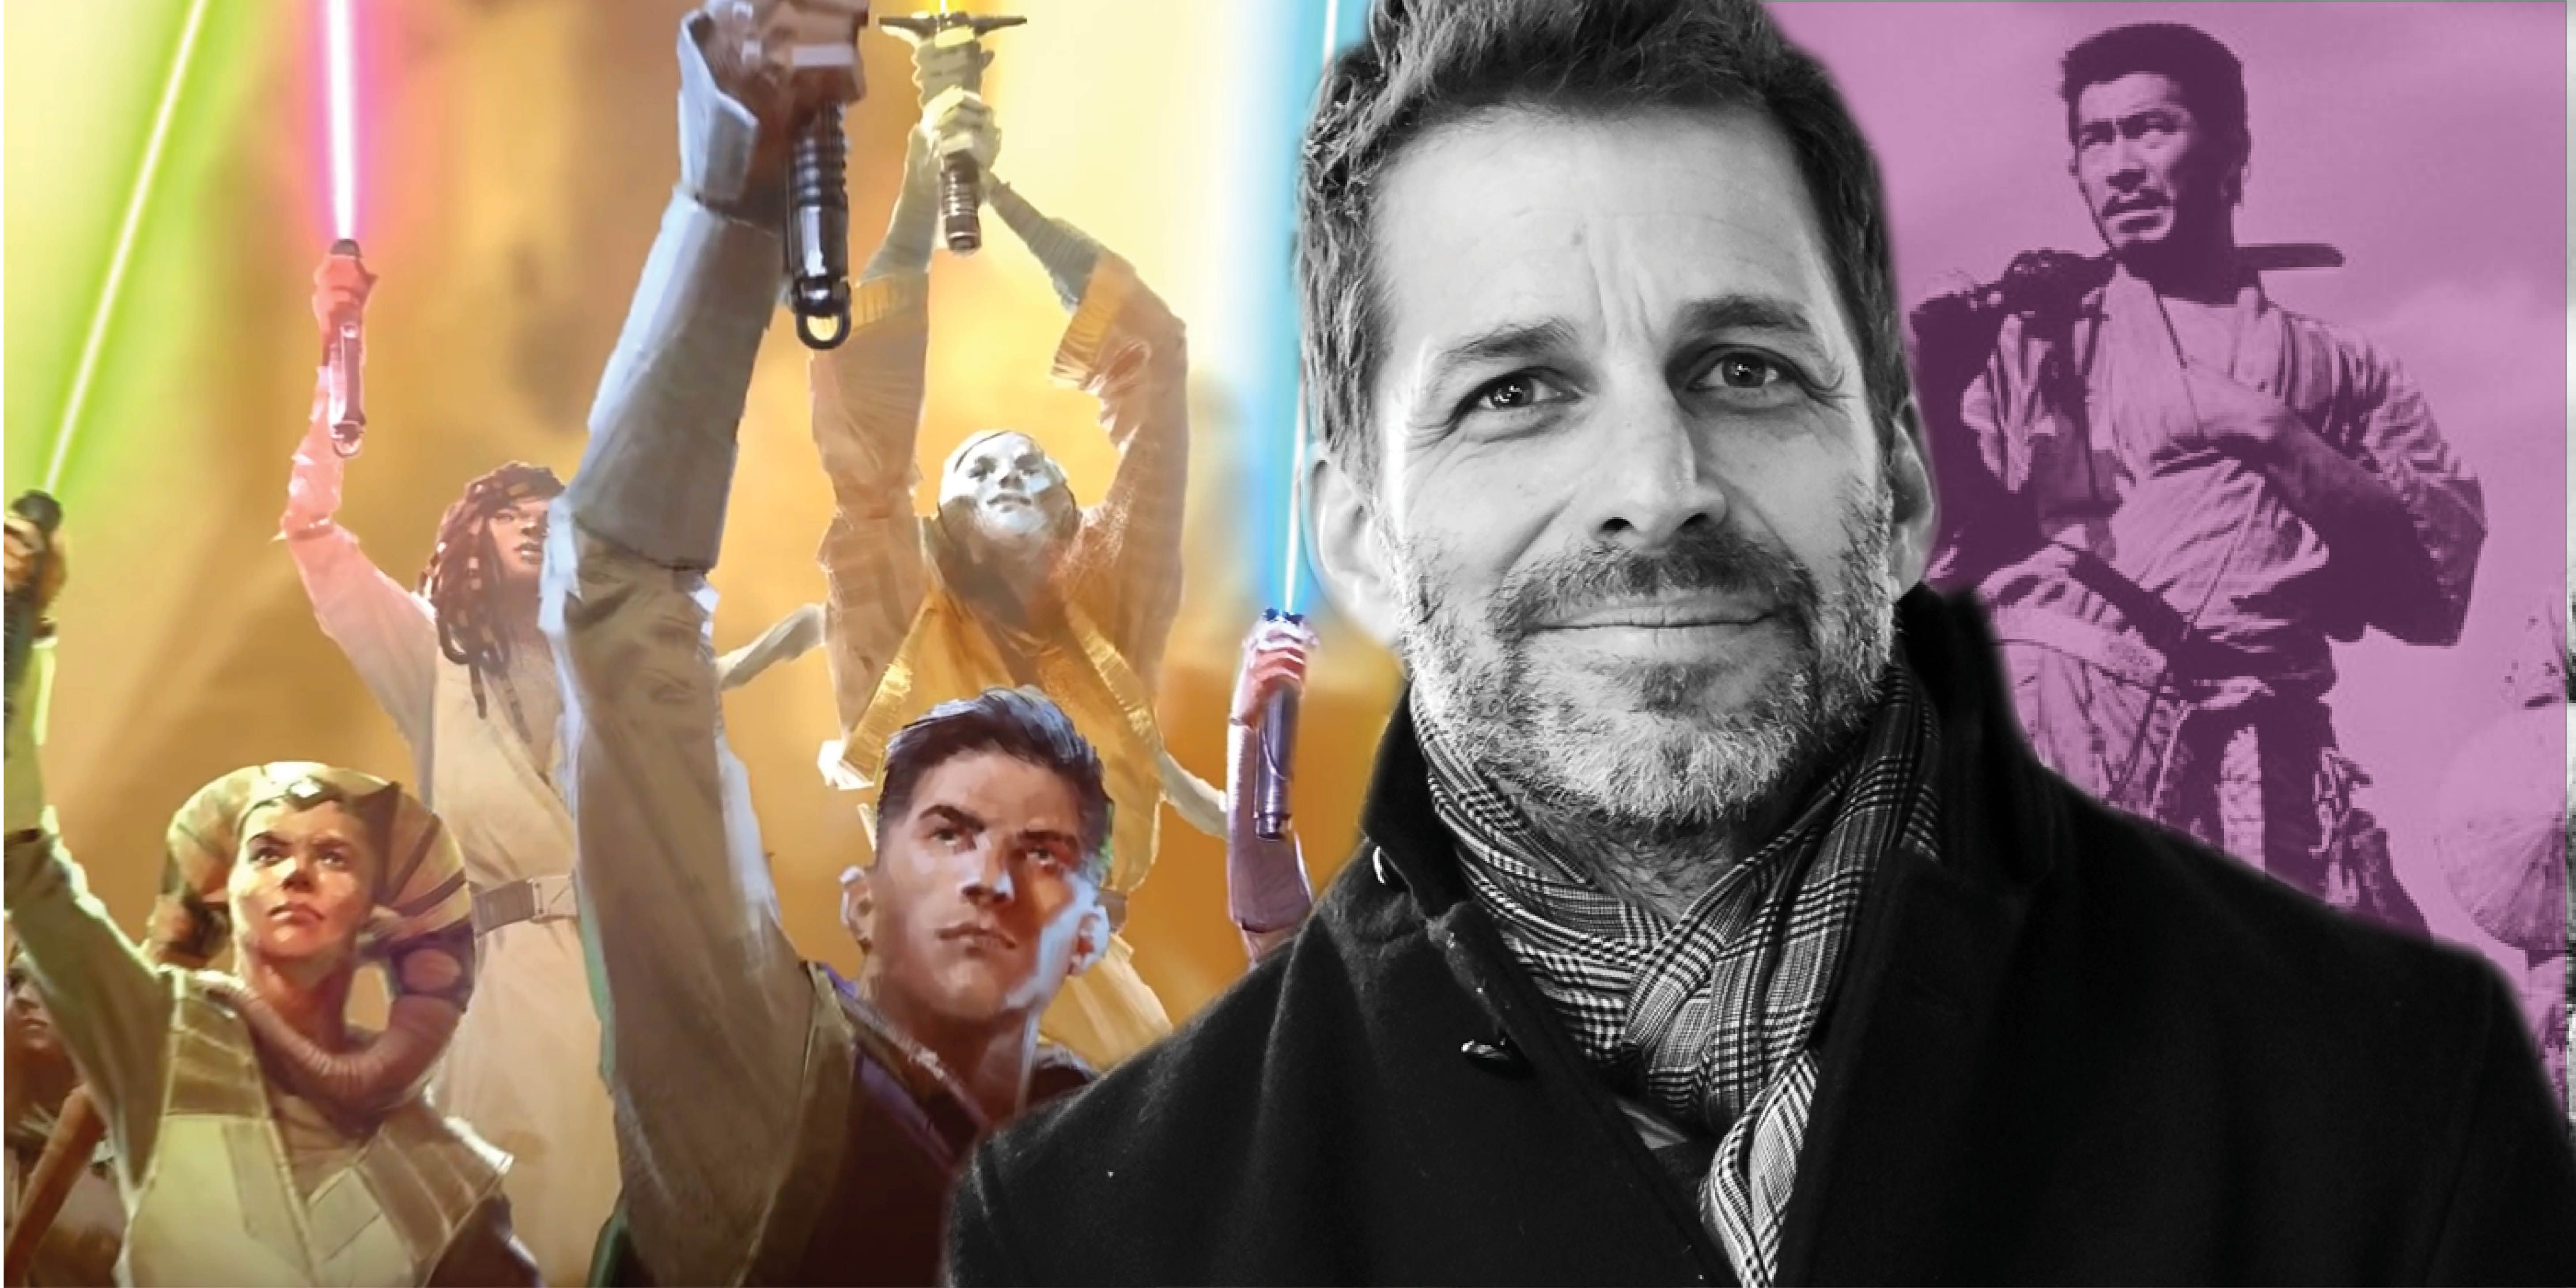 Zack Snyder Reflects On His Kurosawa Inspired Star Wars Movie That Never Happened